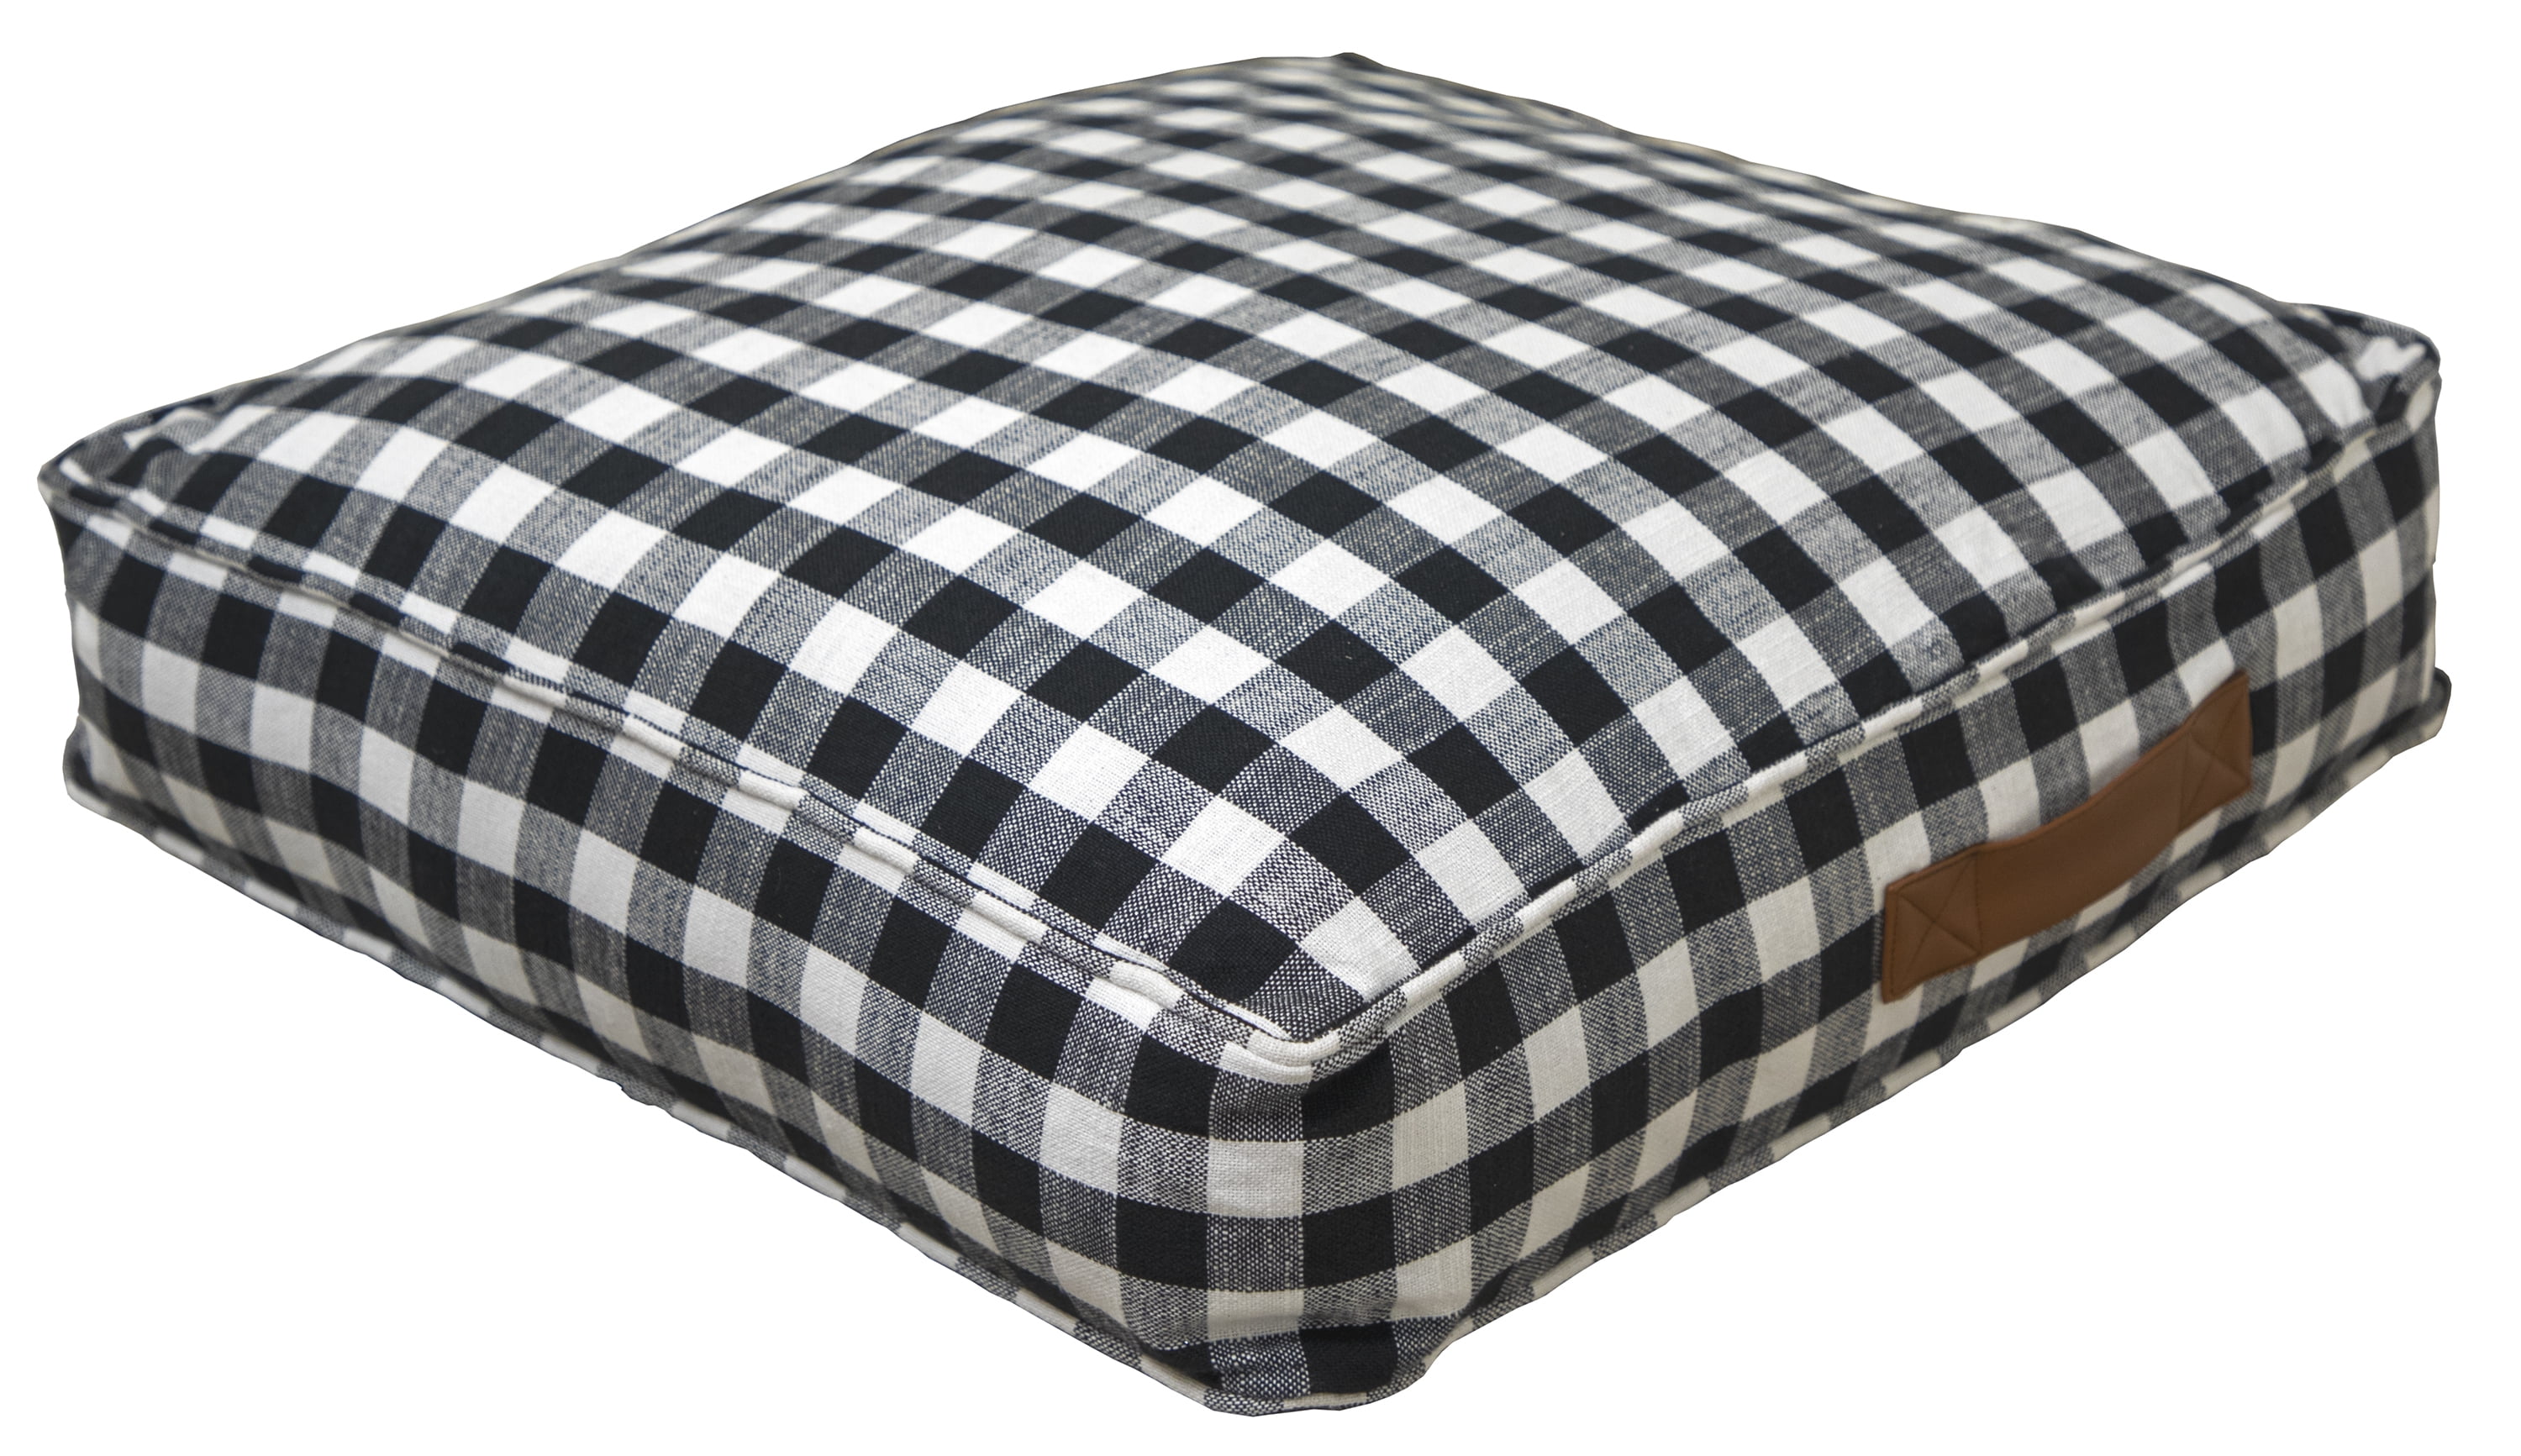 24x24x5 Better Homes & Gardens Yarn Dyed Floor Cushion Black and White Gingham